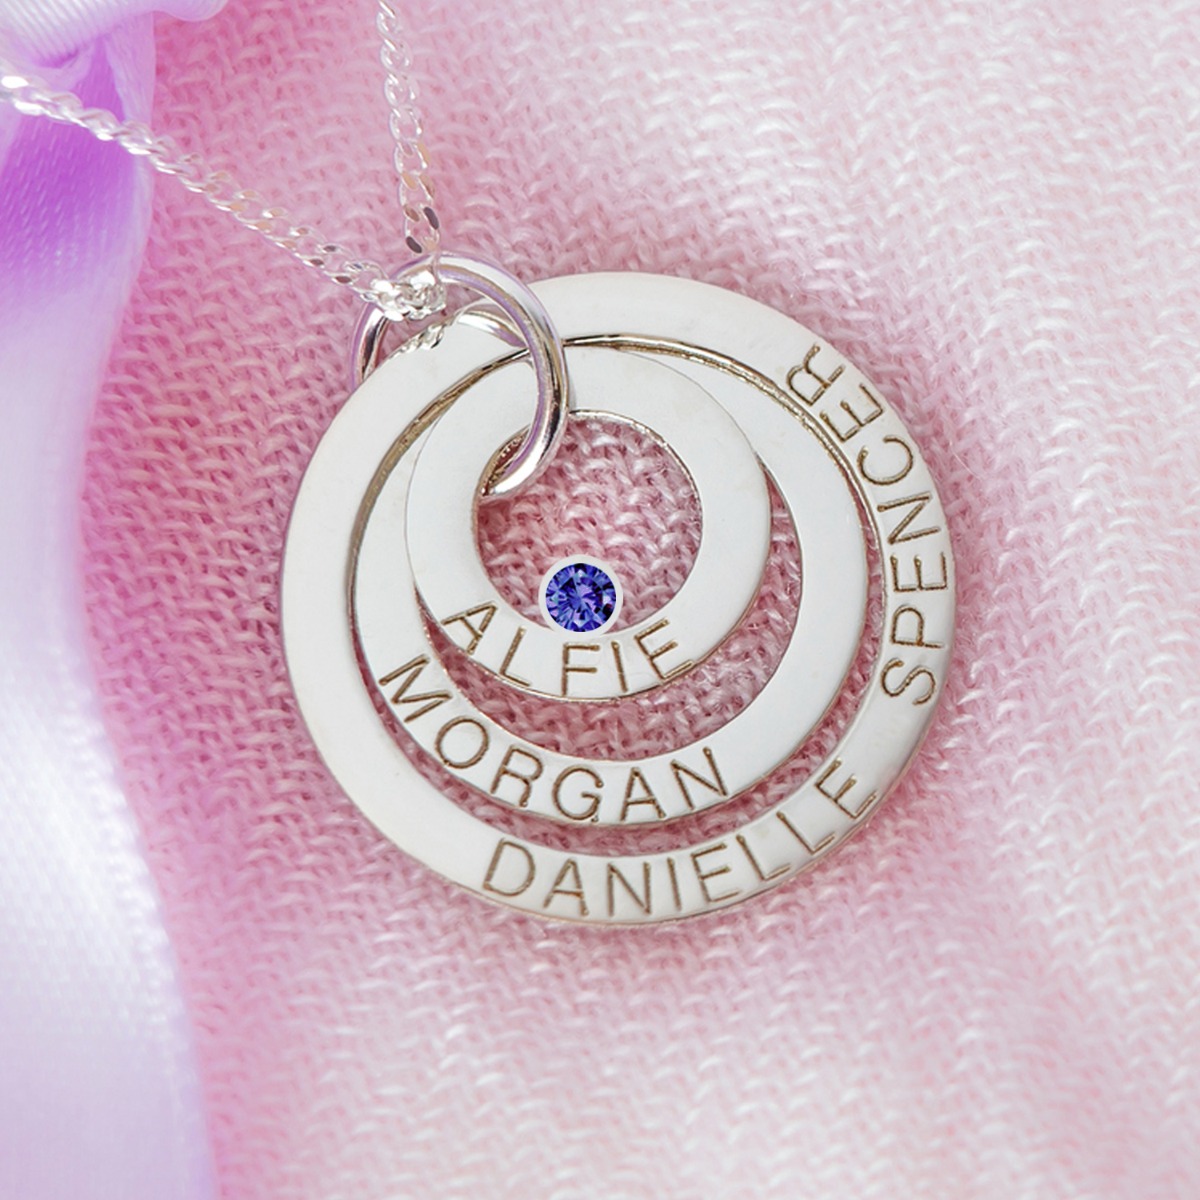 9ct White Gold Engraved Triple Disc Personalised Family Necklace With Sapphire